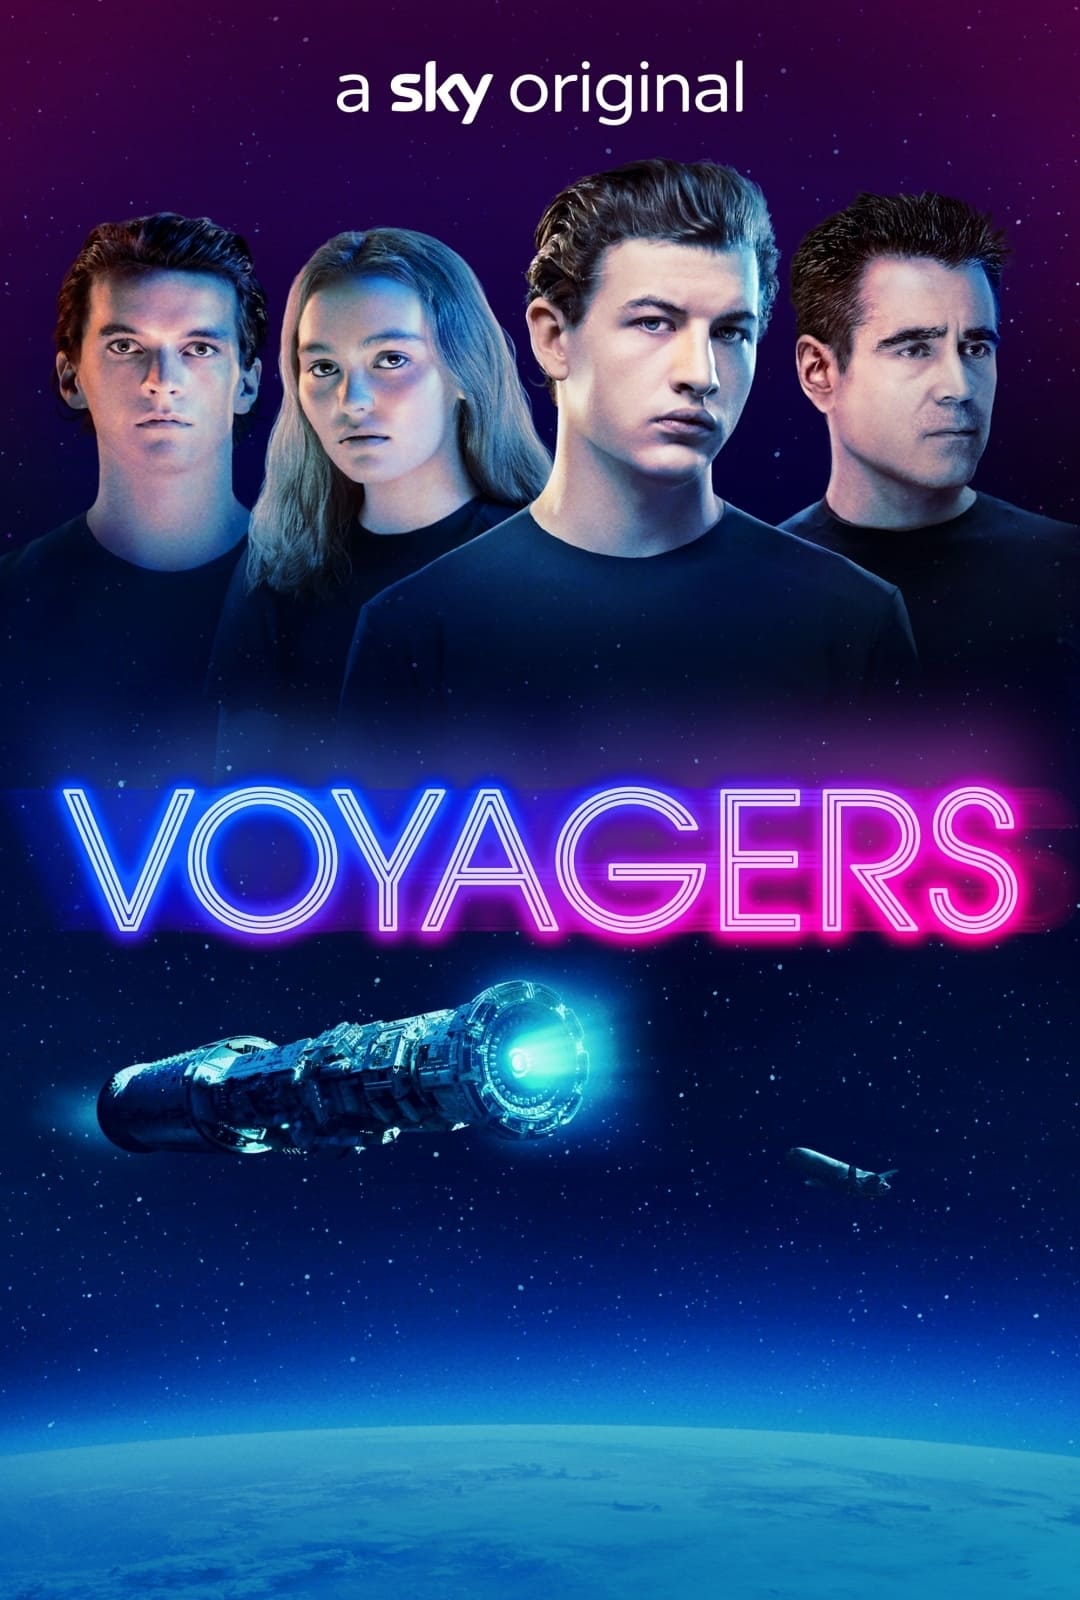 voyagers full movie 2021